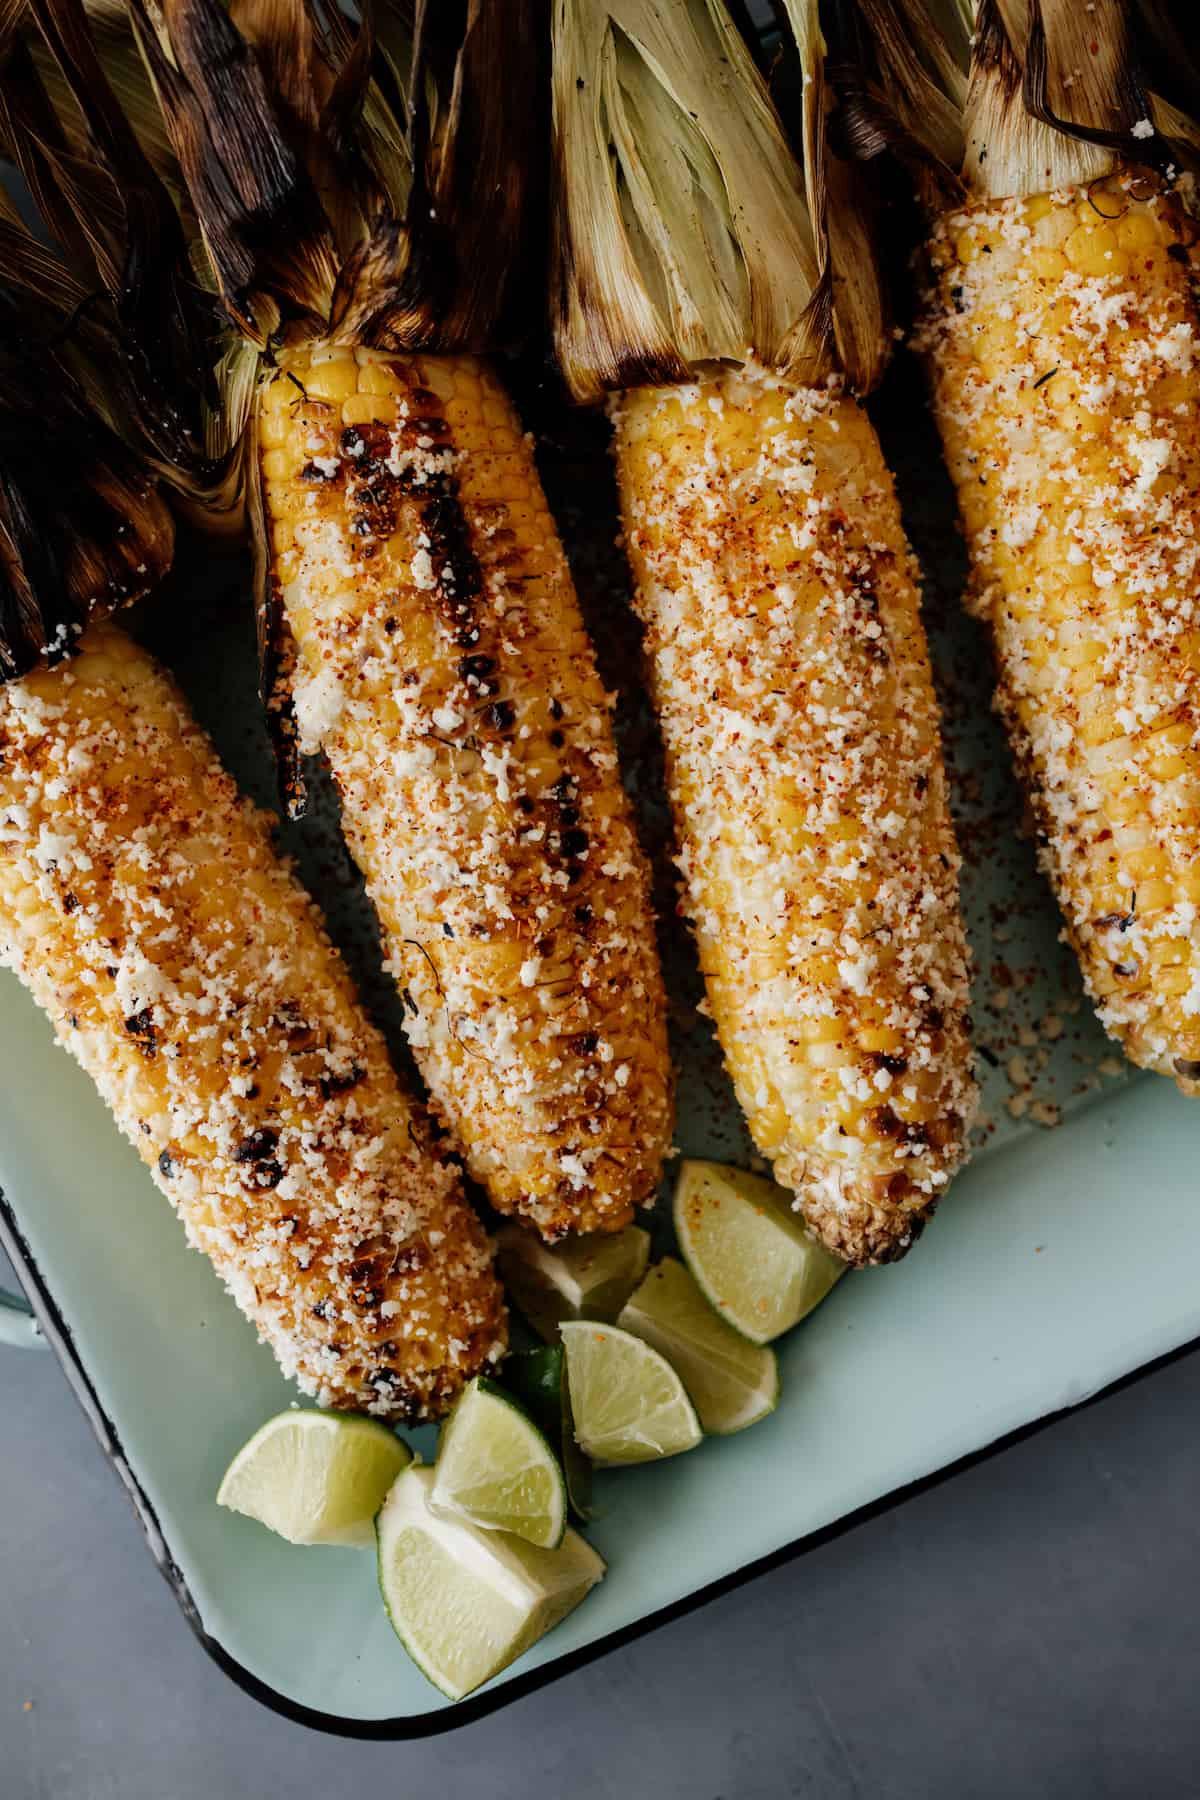 4 pieces of Mexican street corn on a serving platter.